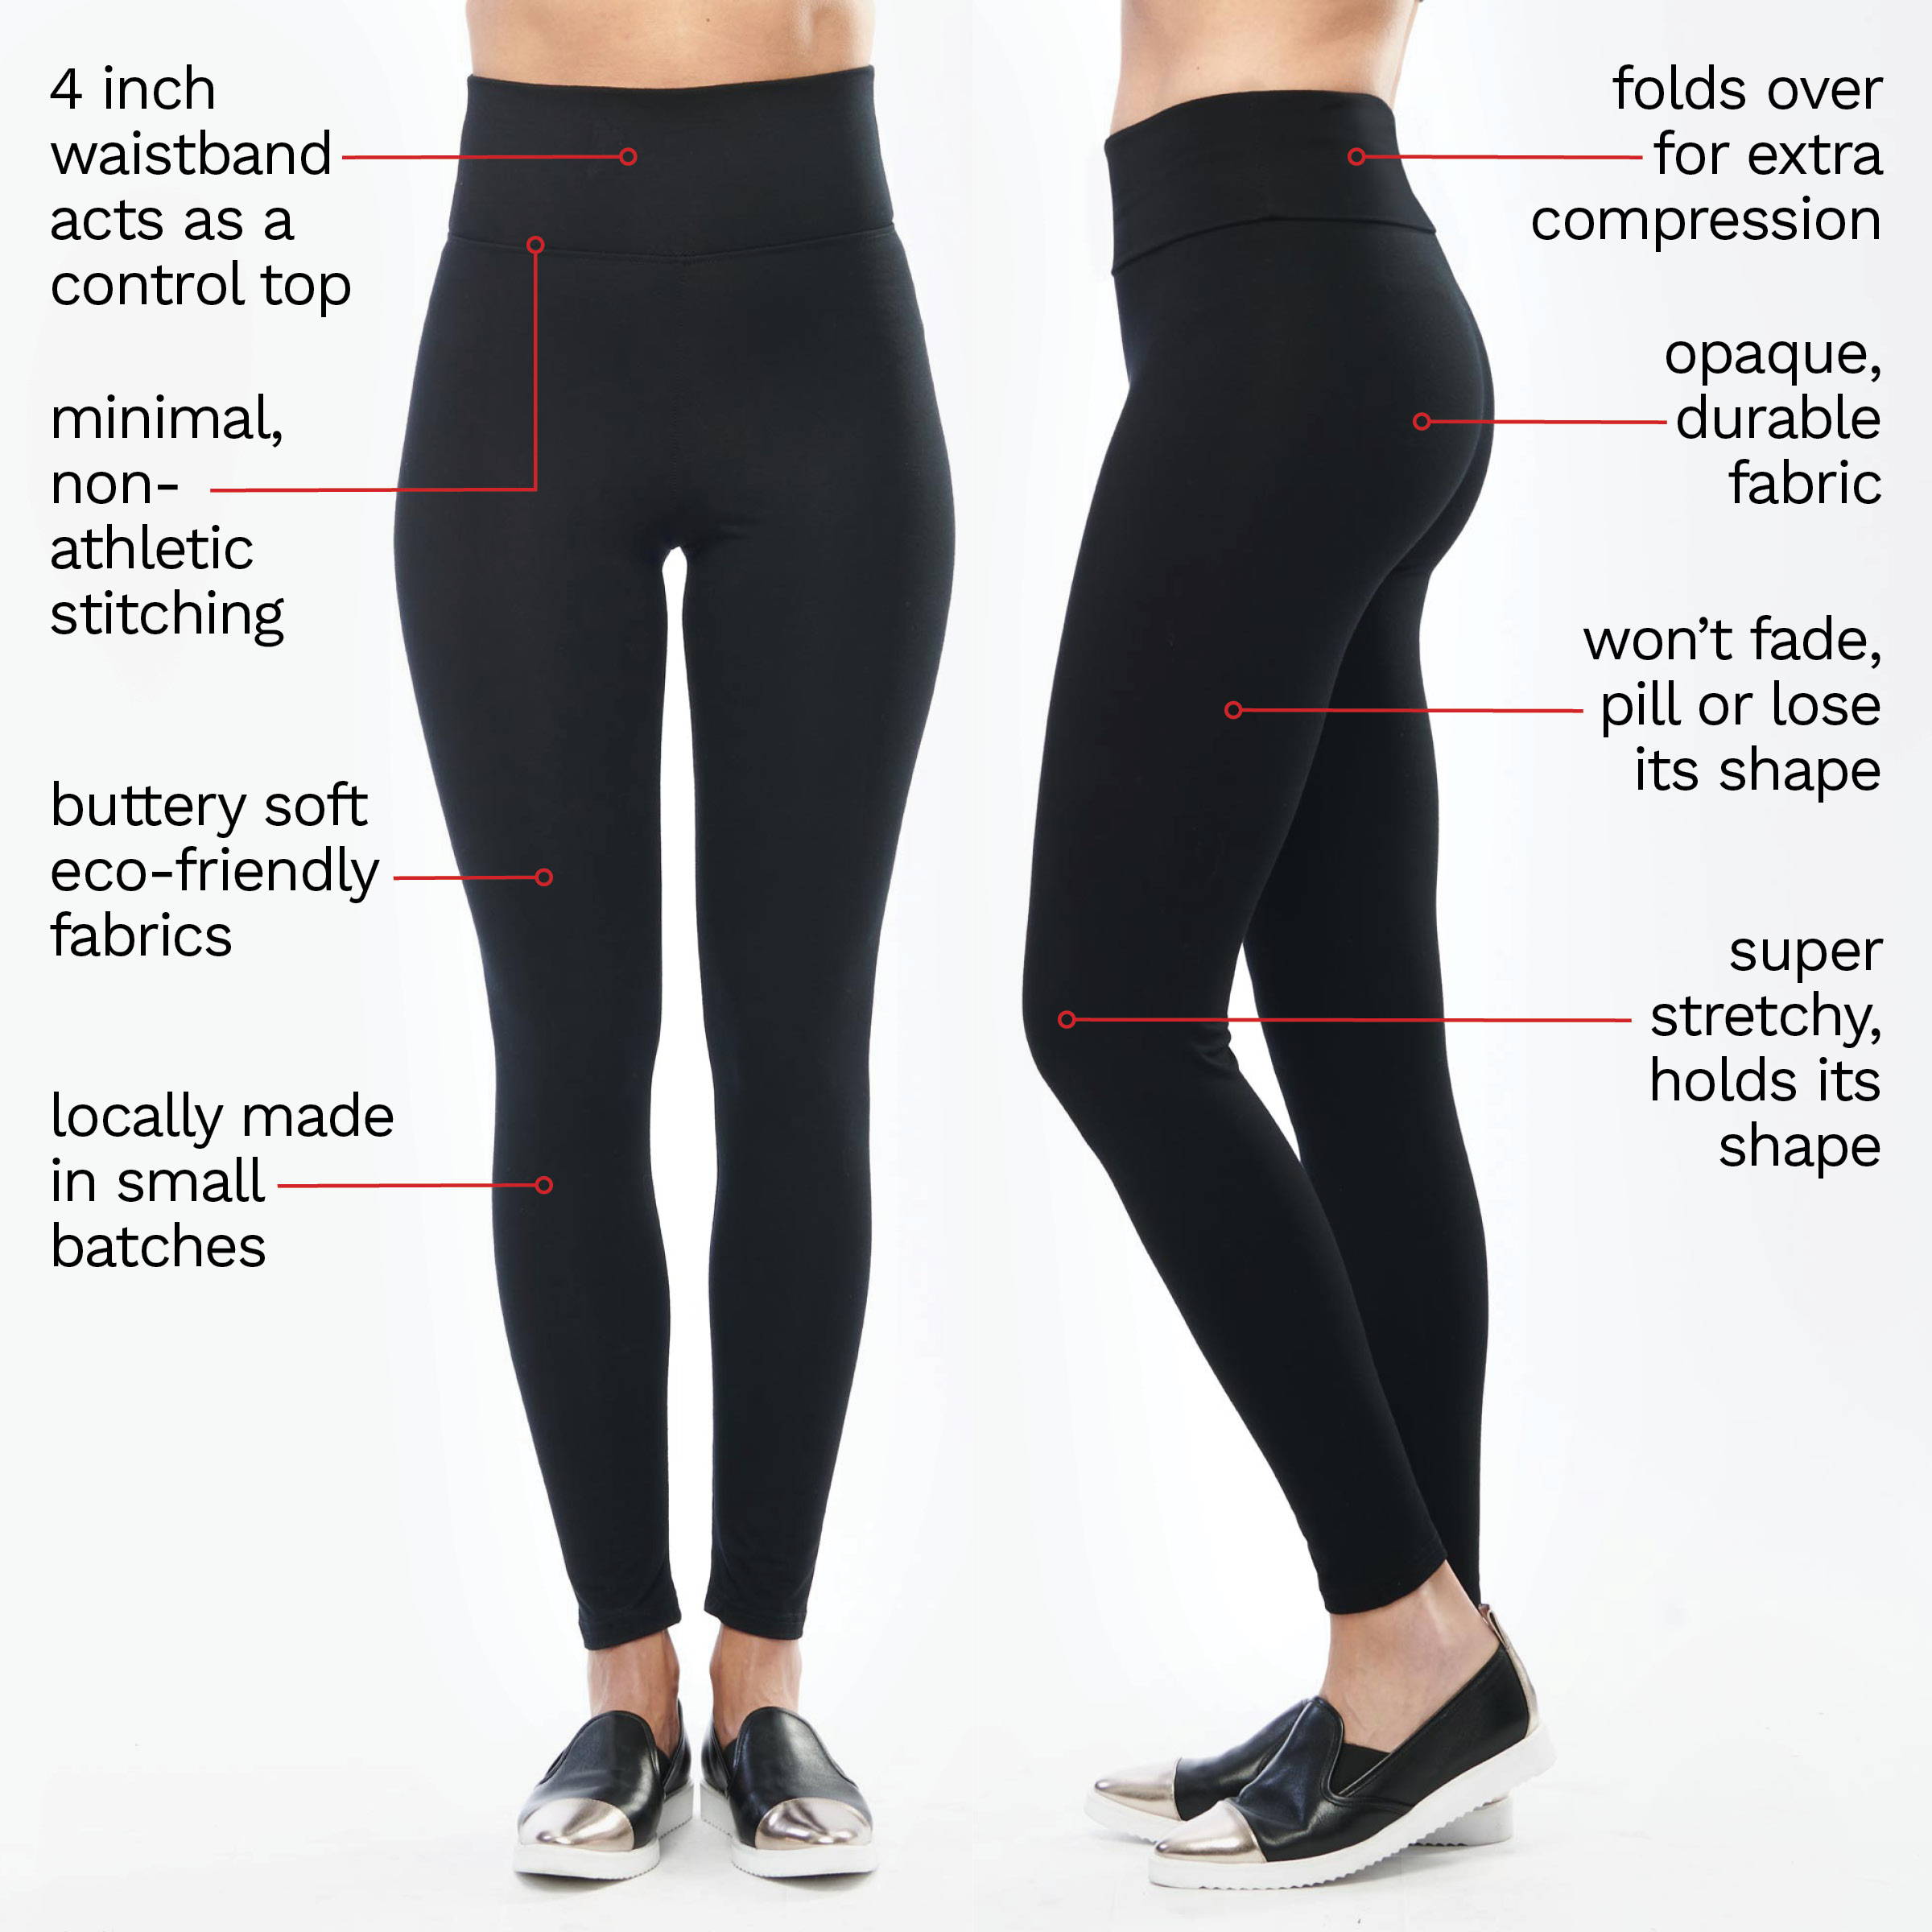 A closeup image of Miik's leggings with writings on the size talking about the features.